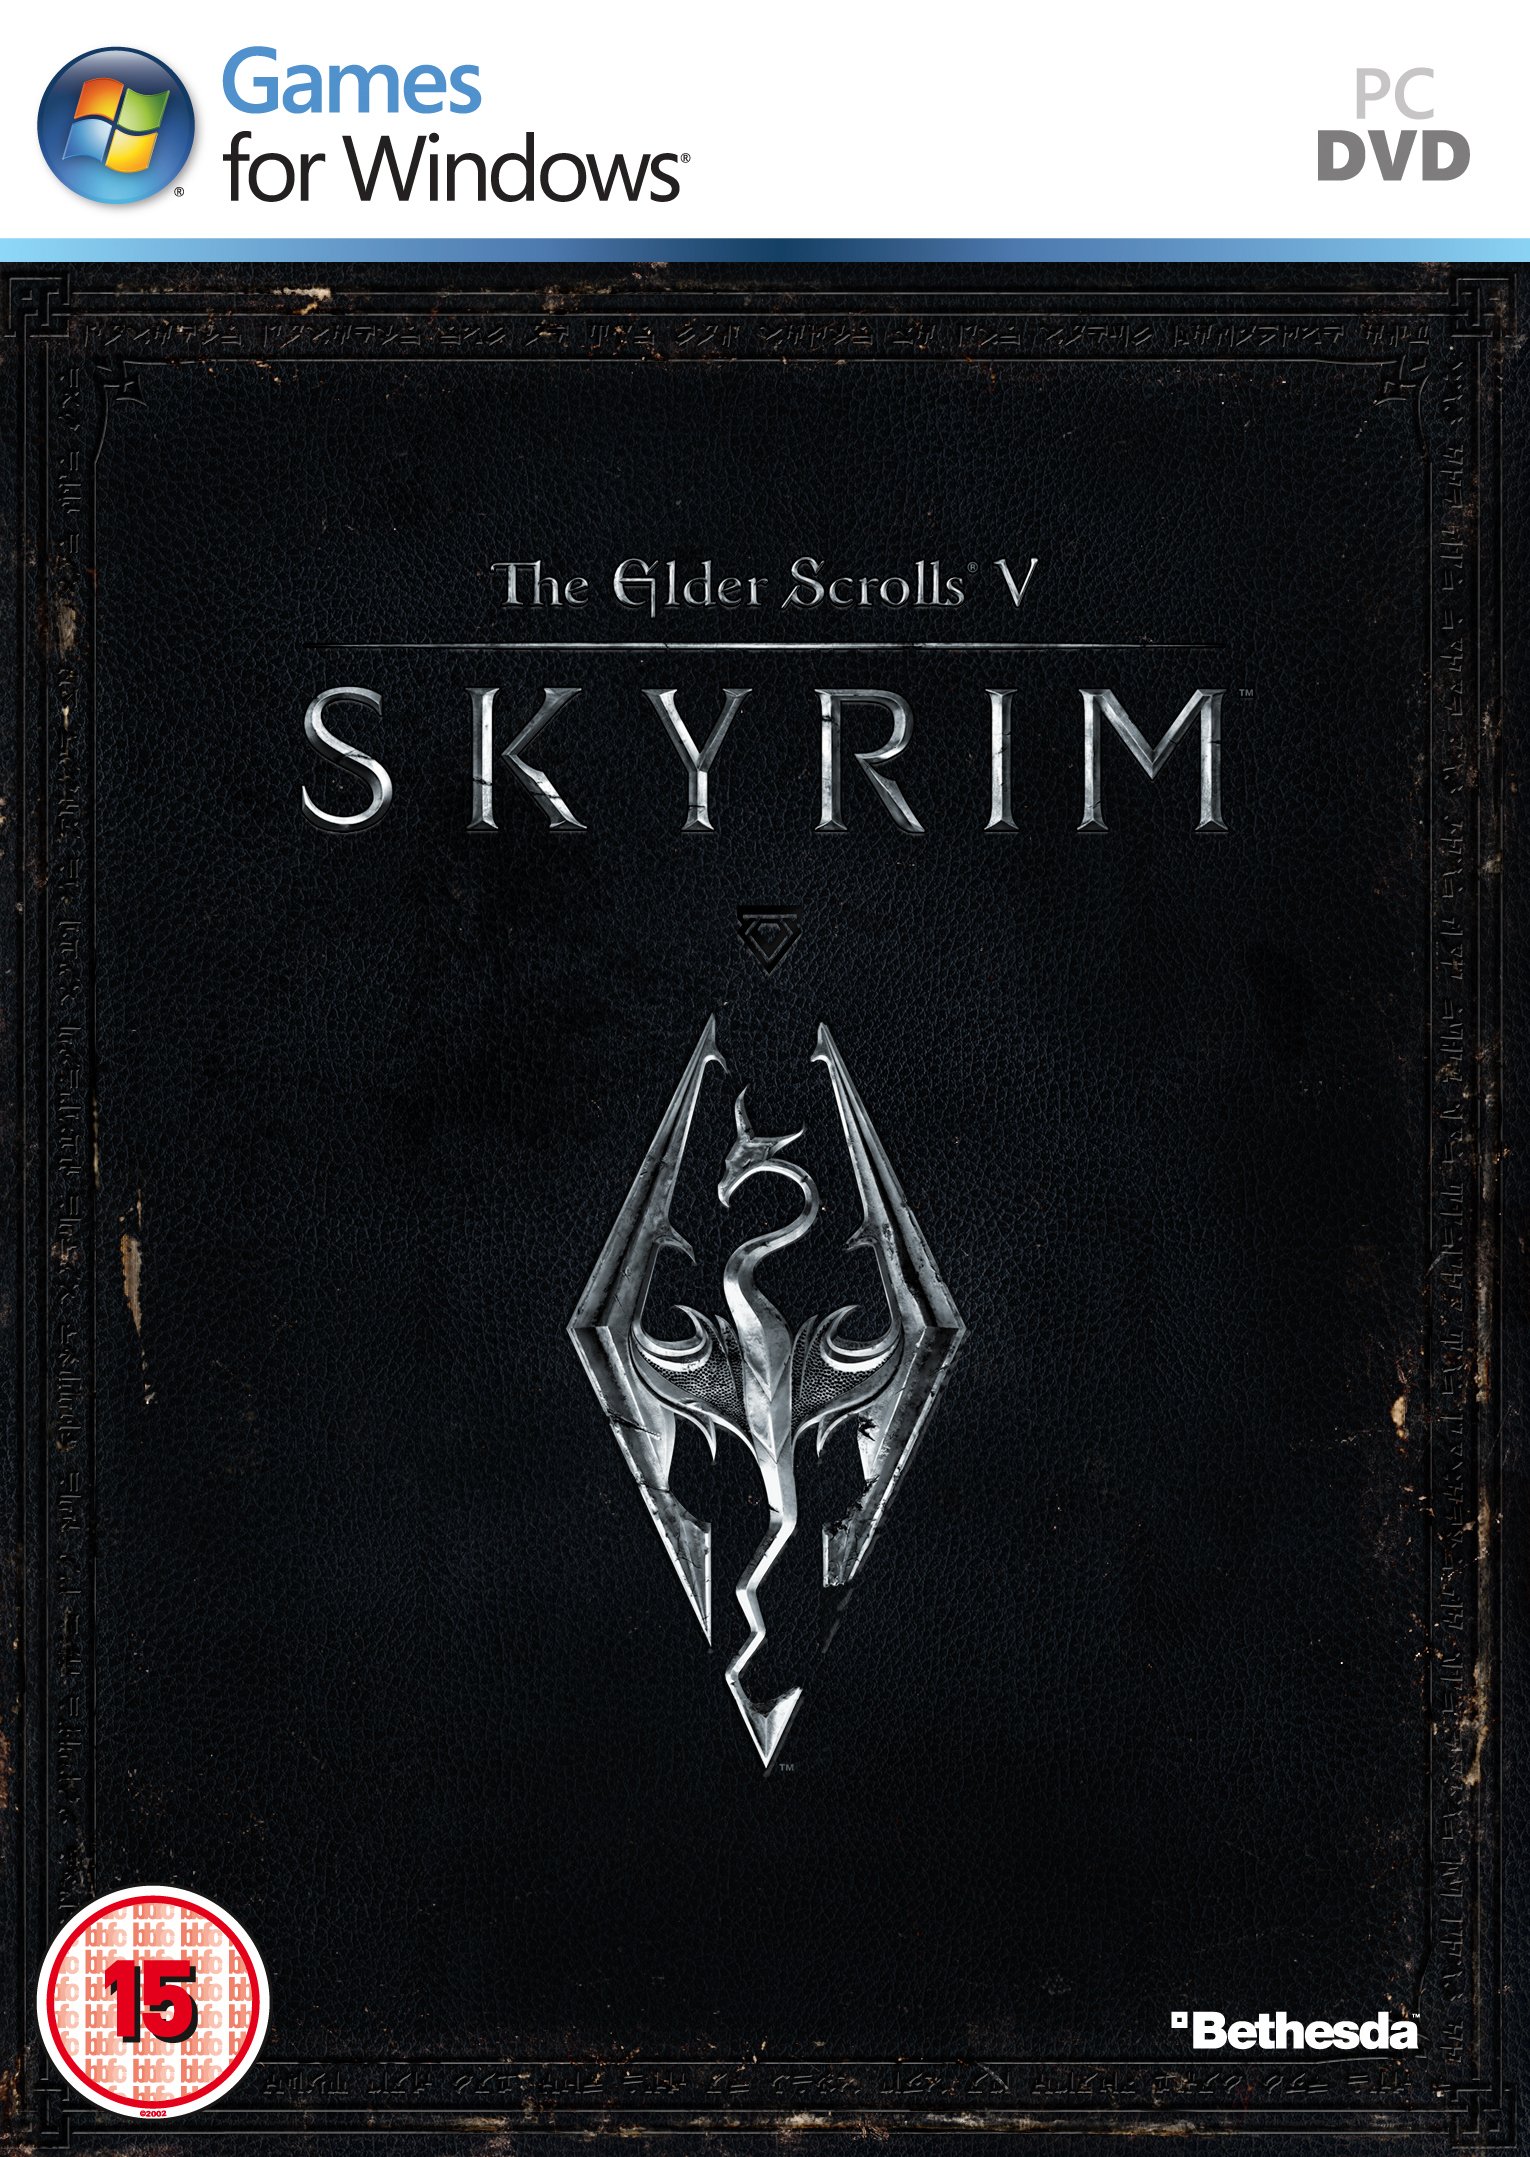 Download the latest DirectX version to ensure compatibility with Skyrim Special Edition.
Check if your computer meets the minimum system requirements for running Skyrim Special Edition.